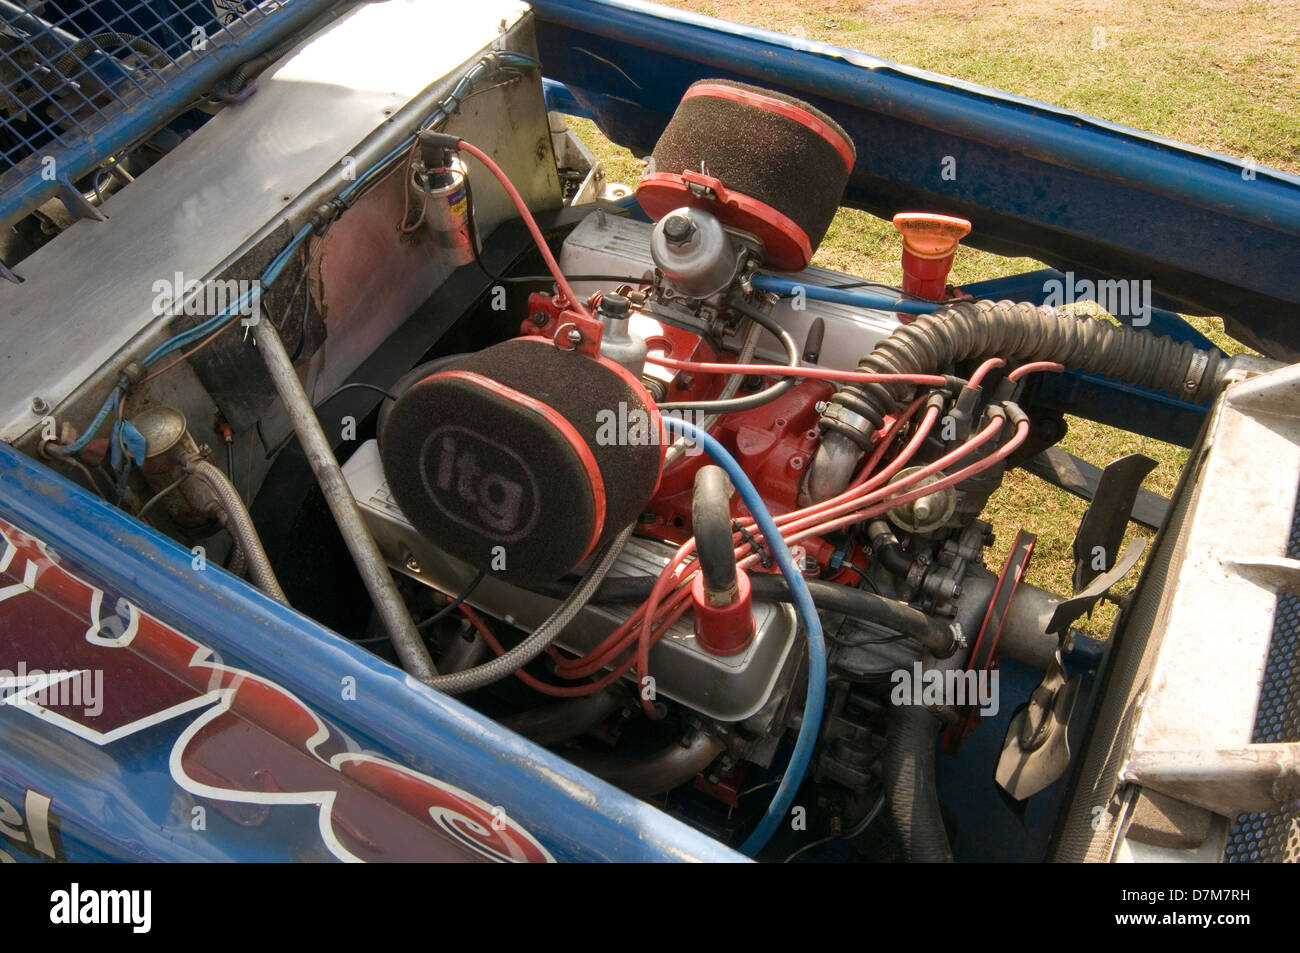 rover v8 engine in stock car air filter filters carbs carburetors carburetor carburetor's Stock Photo